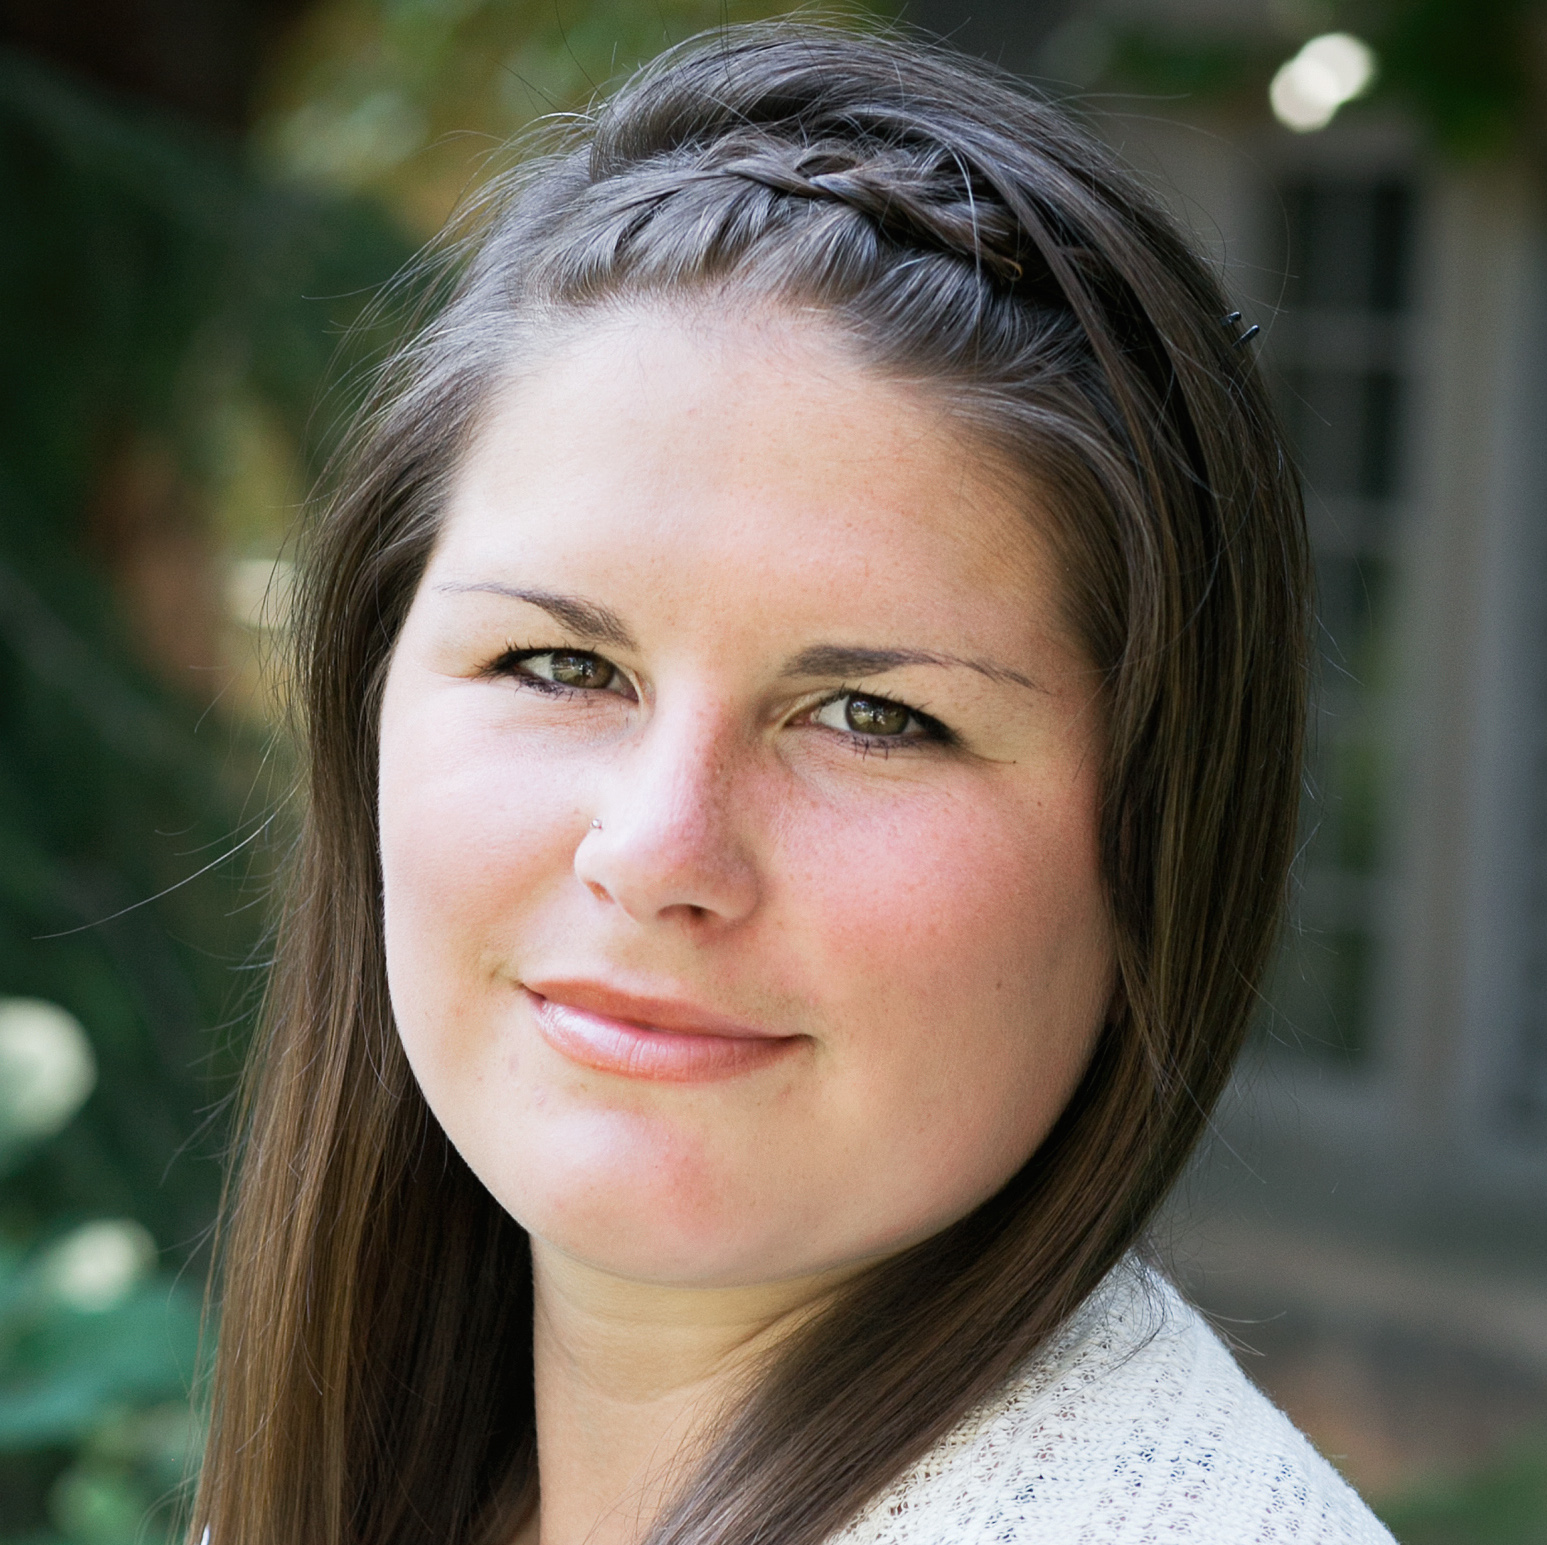 Stephanie McConkey : Assistant Director & Research Program Manager / PhD Student - Epidemiology